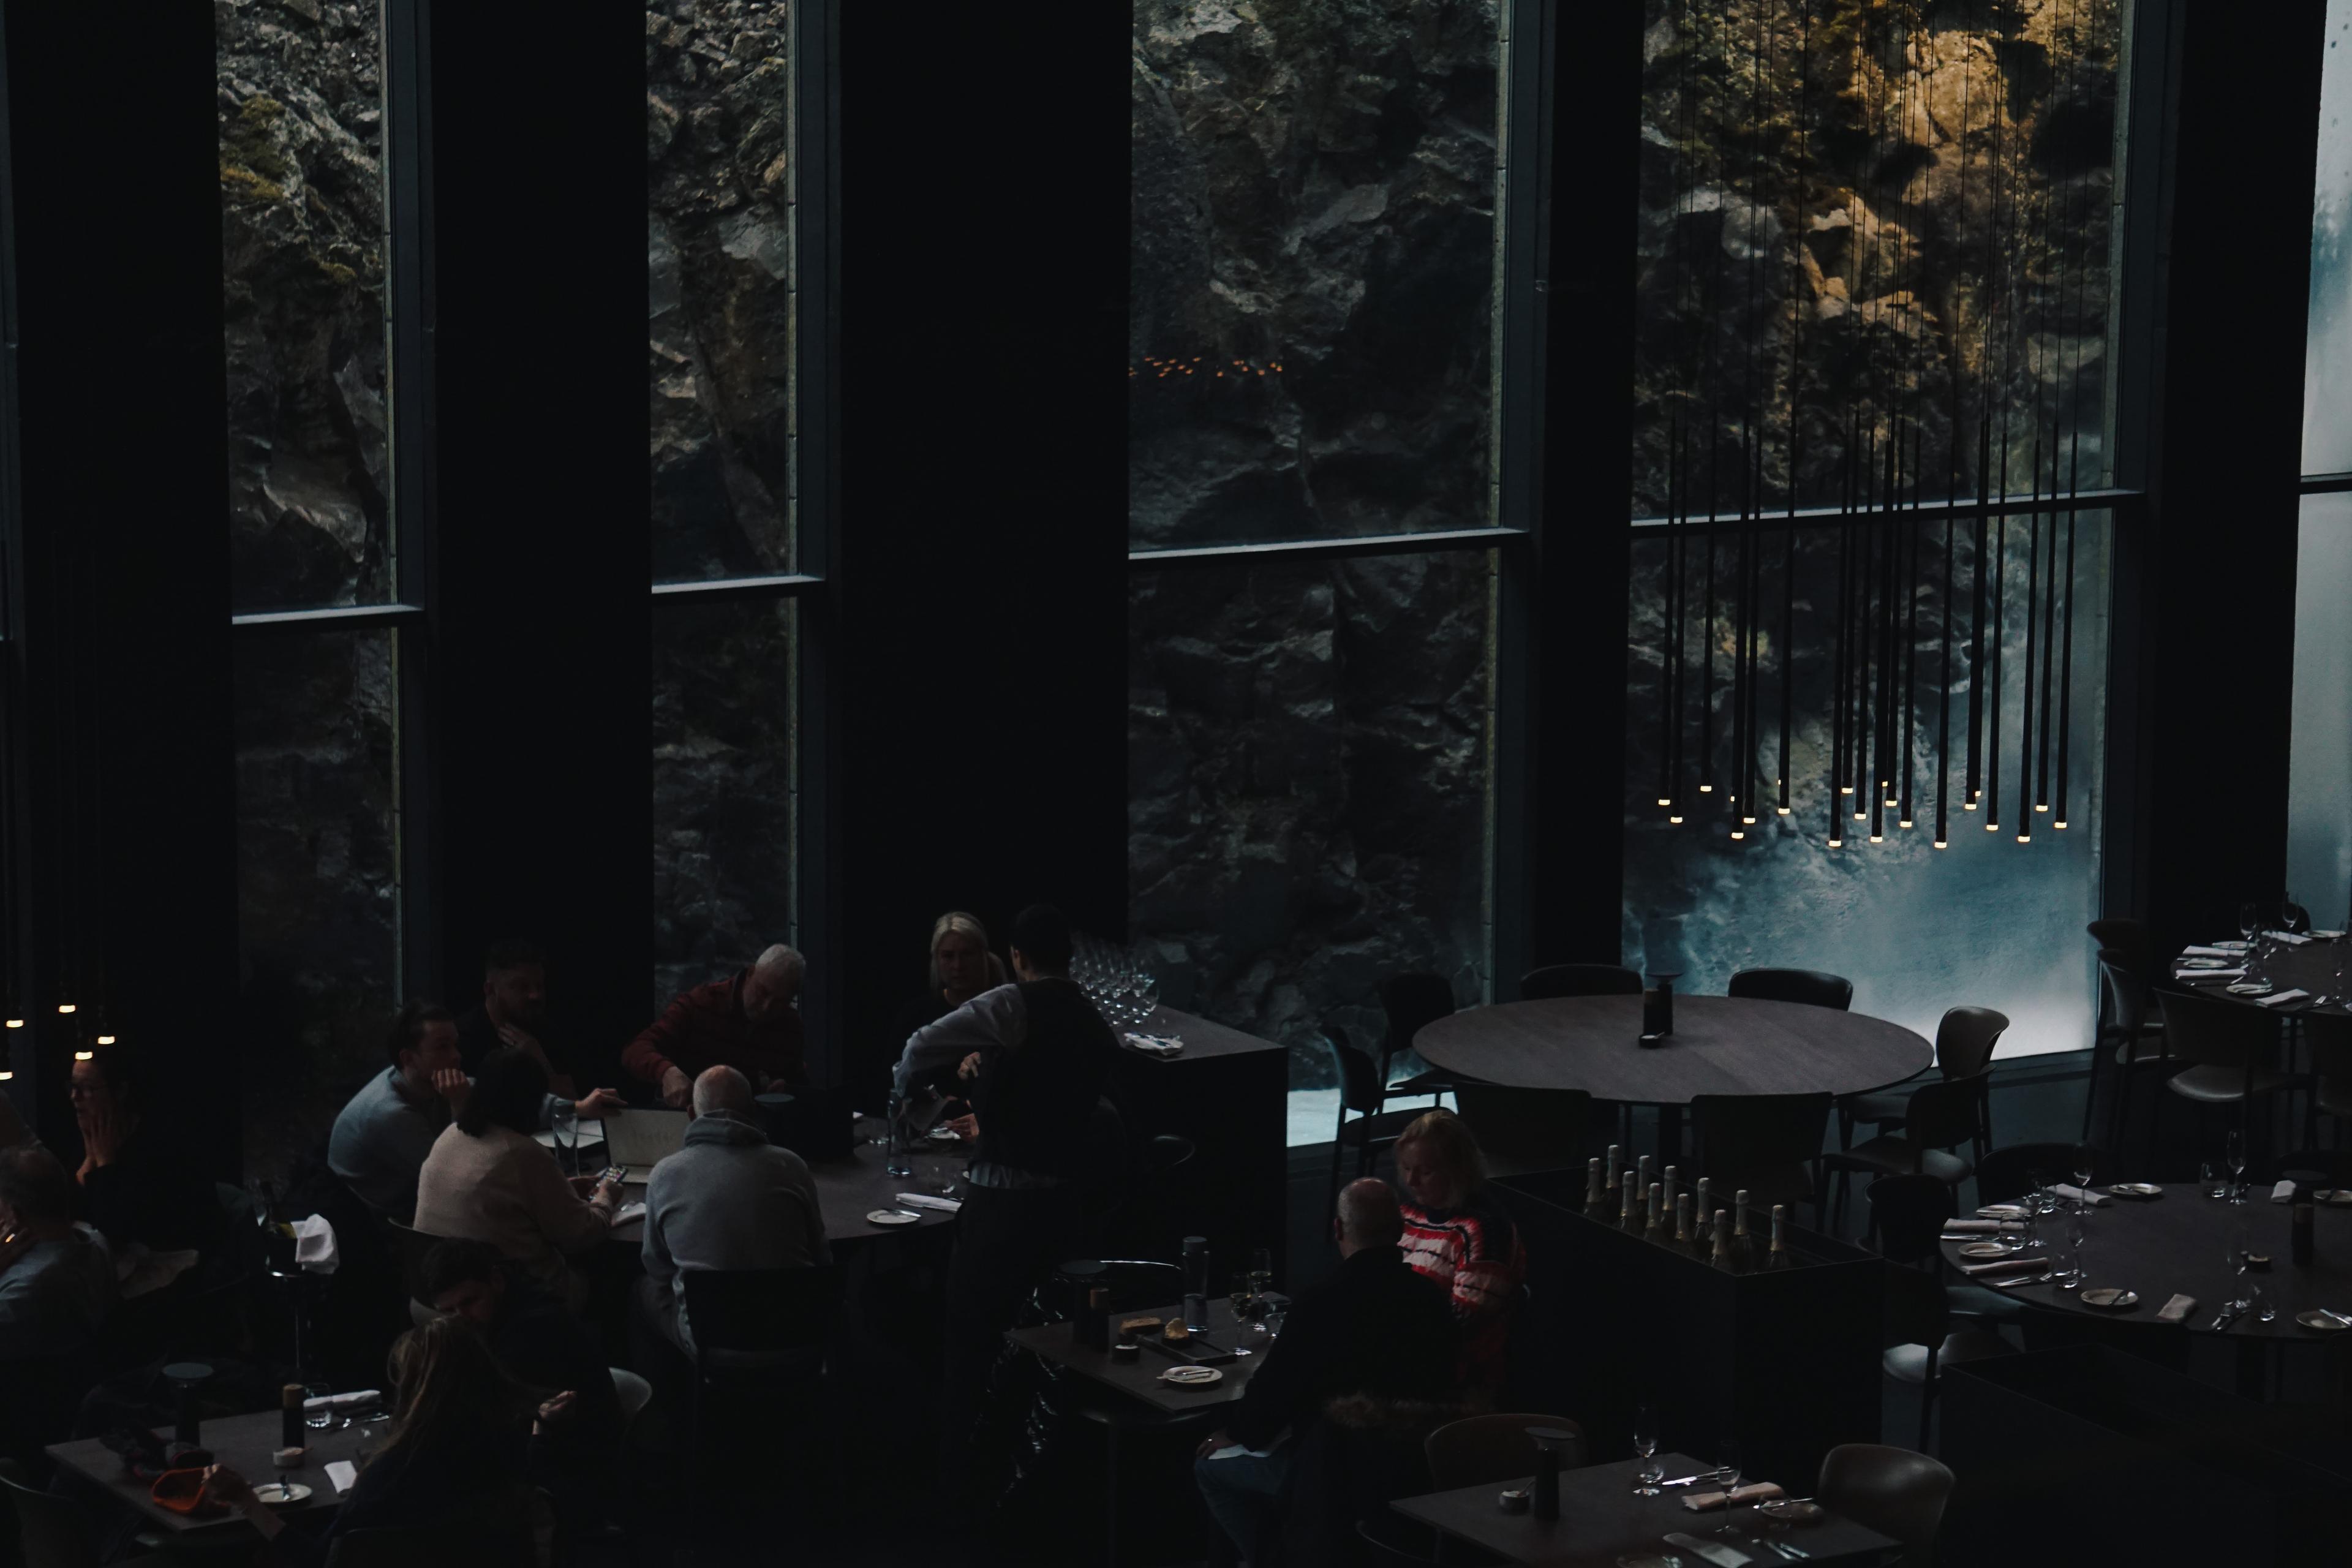 "Guests savoring their meals in the elegantly designed Lava restaurant at the Blue Lagoon